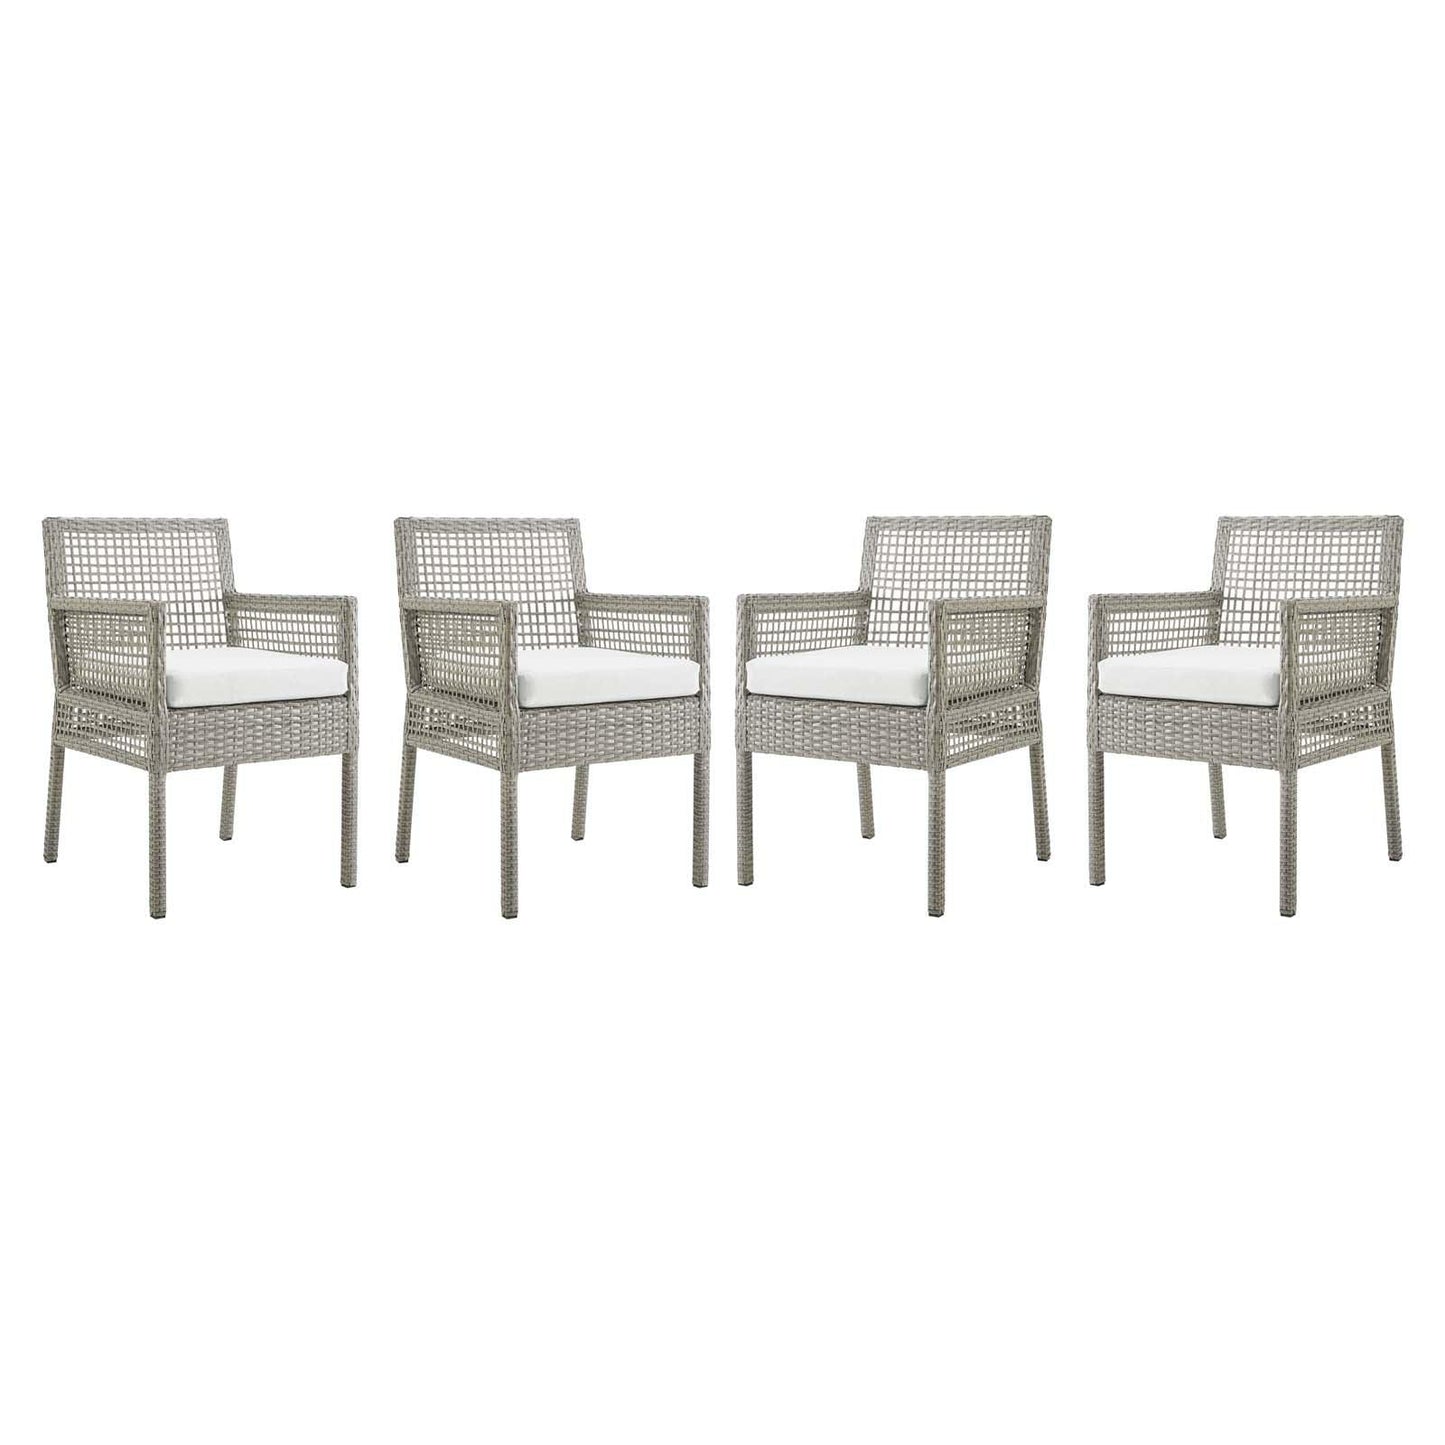 Modway Aura Dining Armchair Outdoor Patio Wicker Rattan Set of 4 FredCo